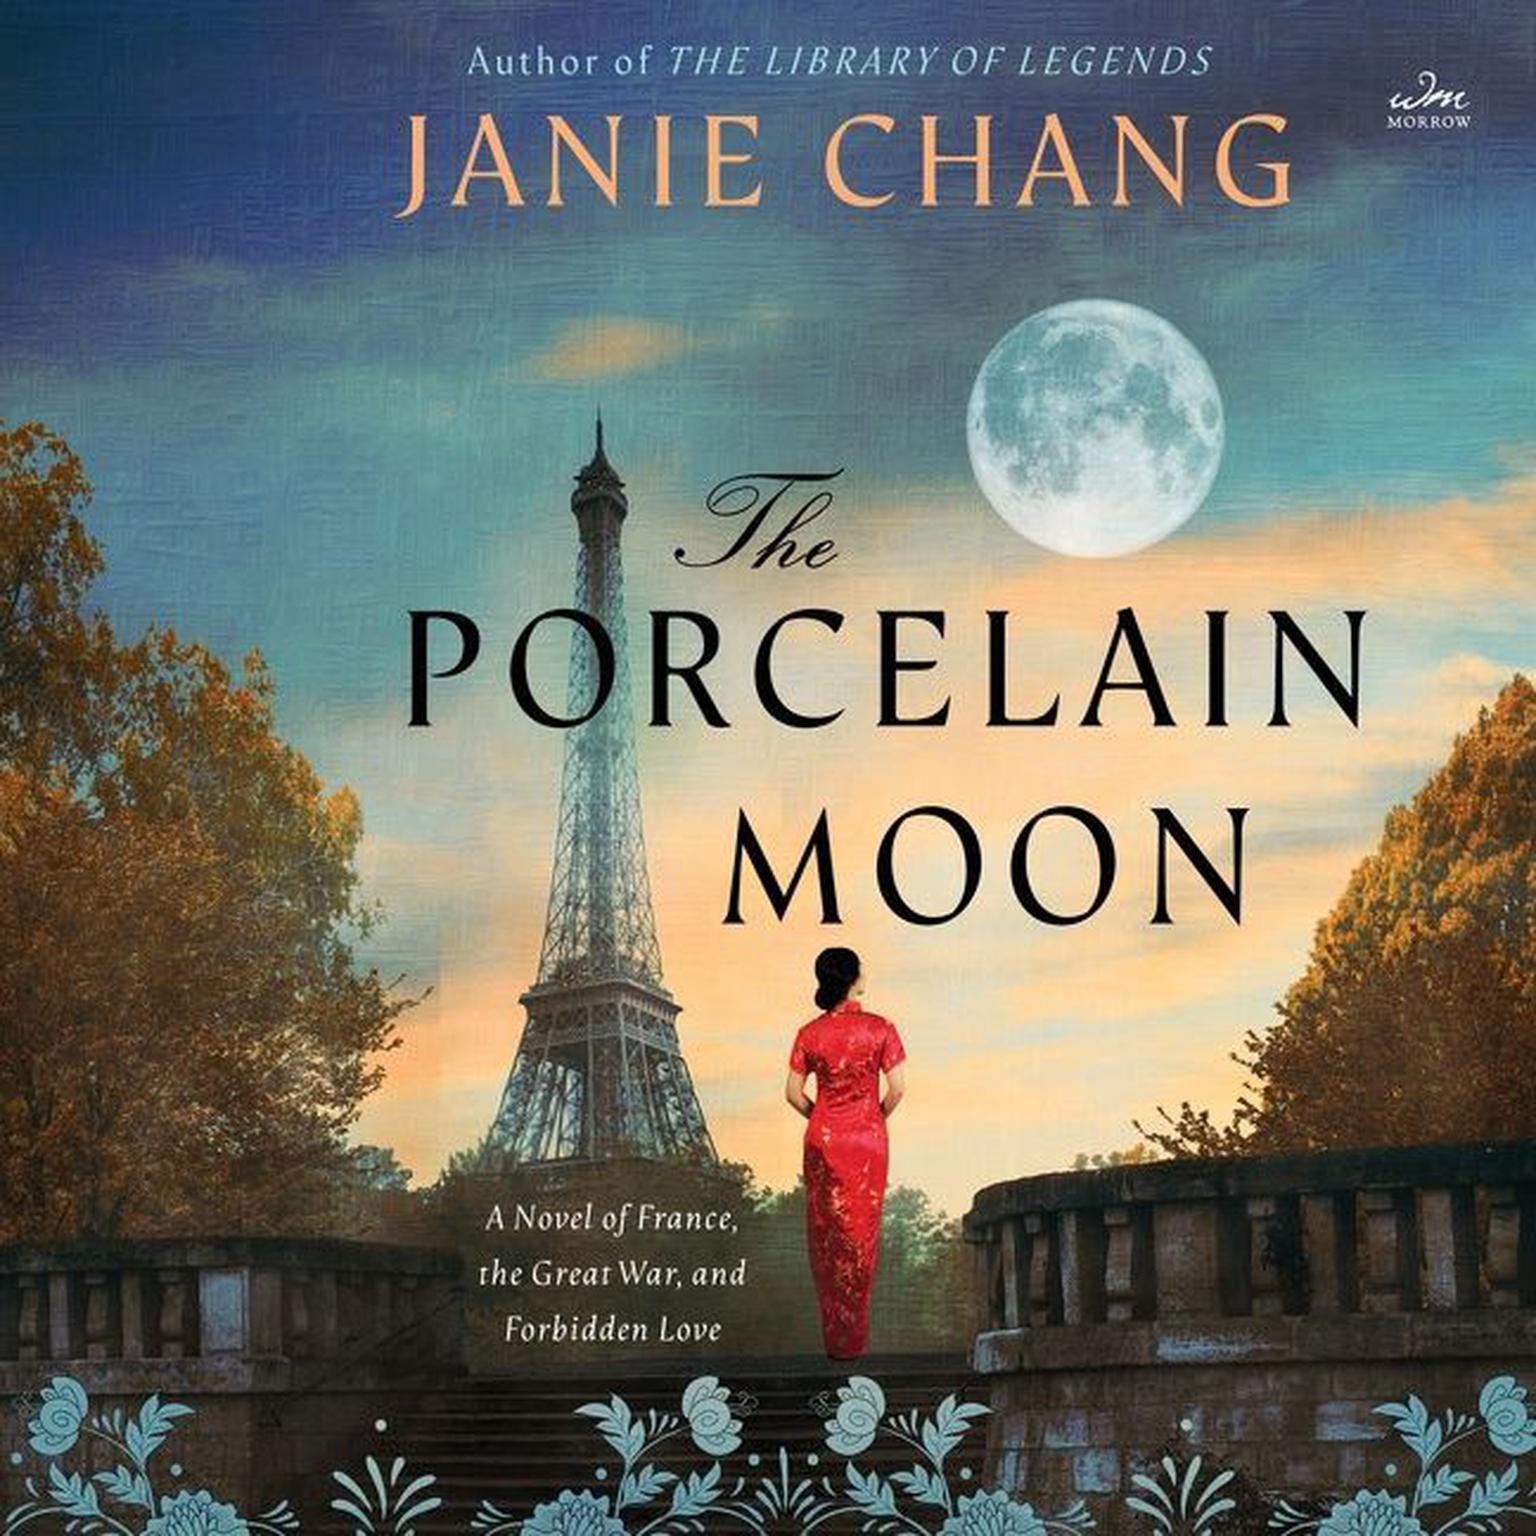 The Porcelain Moon: A Novel of France, the Great War, and Forbidden Love Audiobook, by Janie Chang